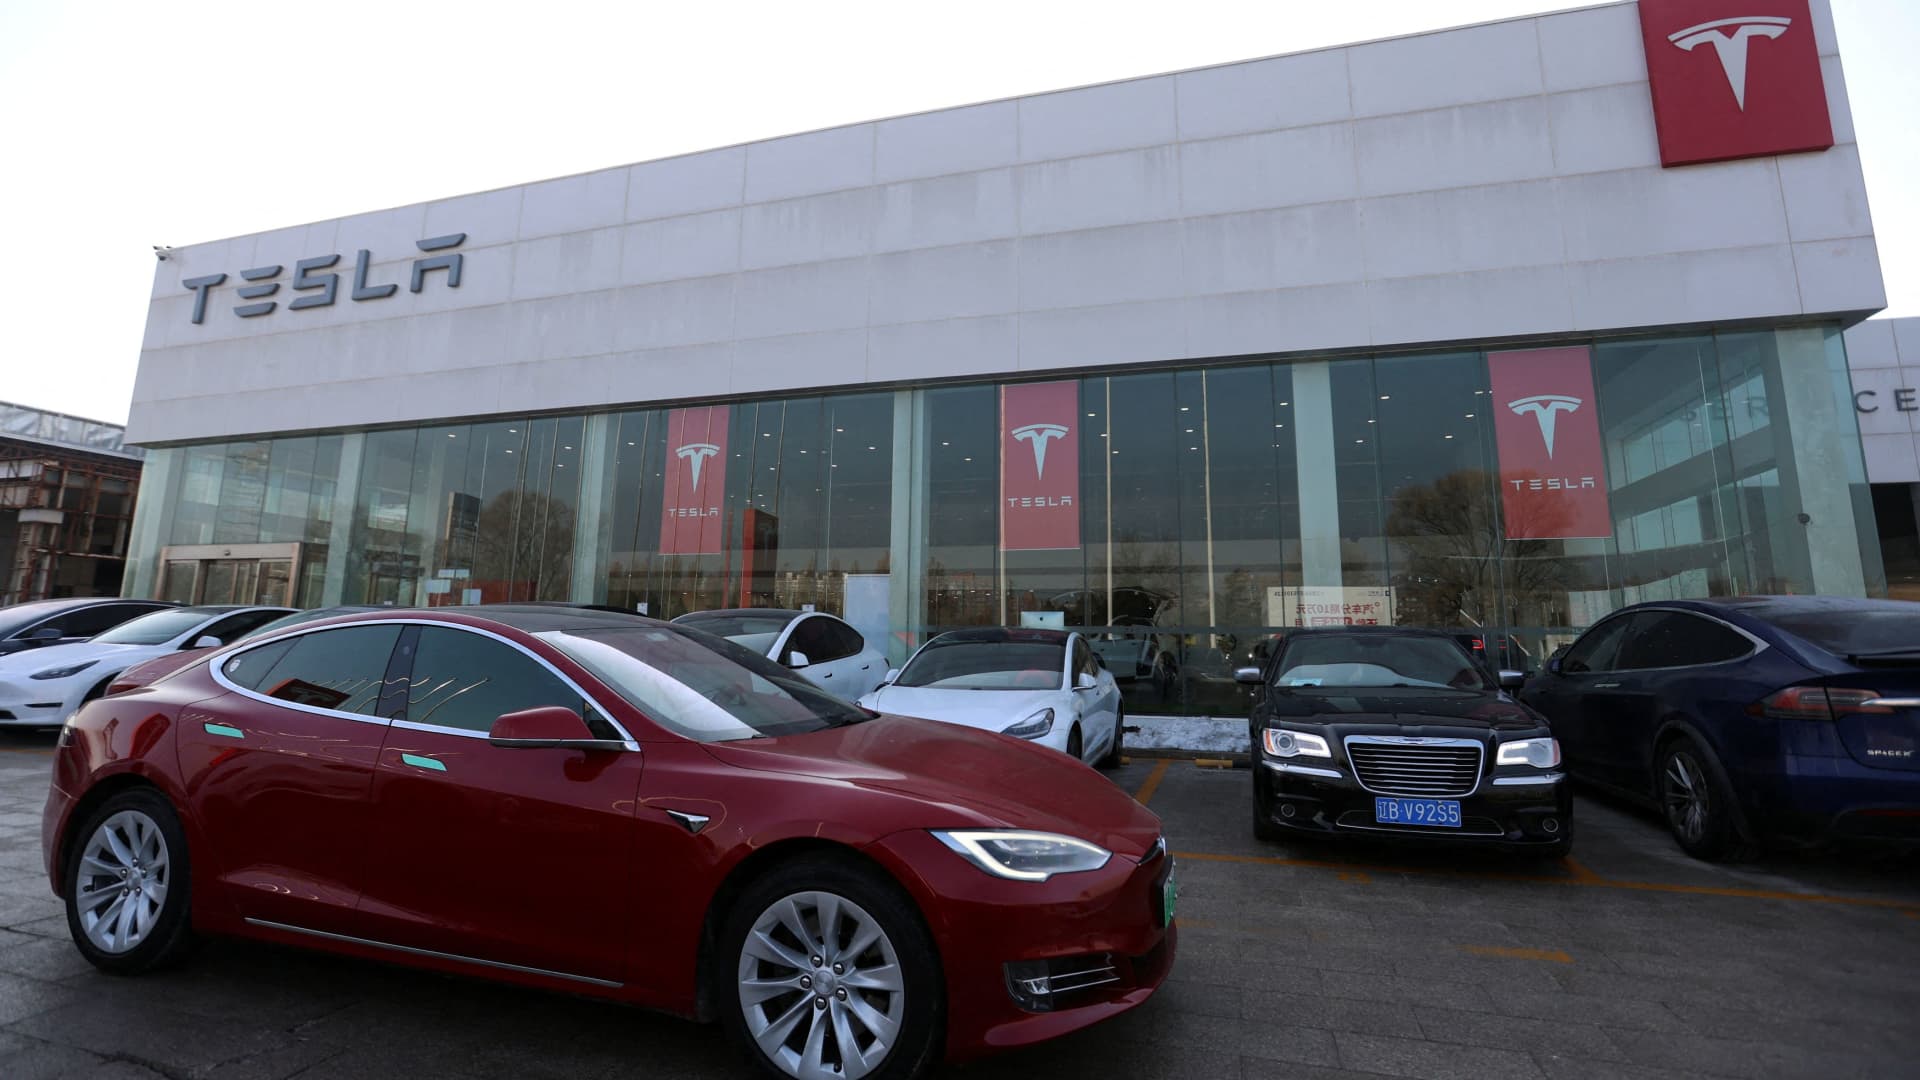 Tesla’s stock wraps up one of its worst quarters on record as global dominance wanes